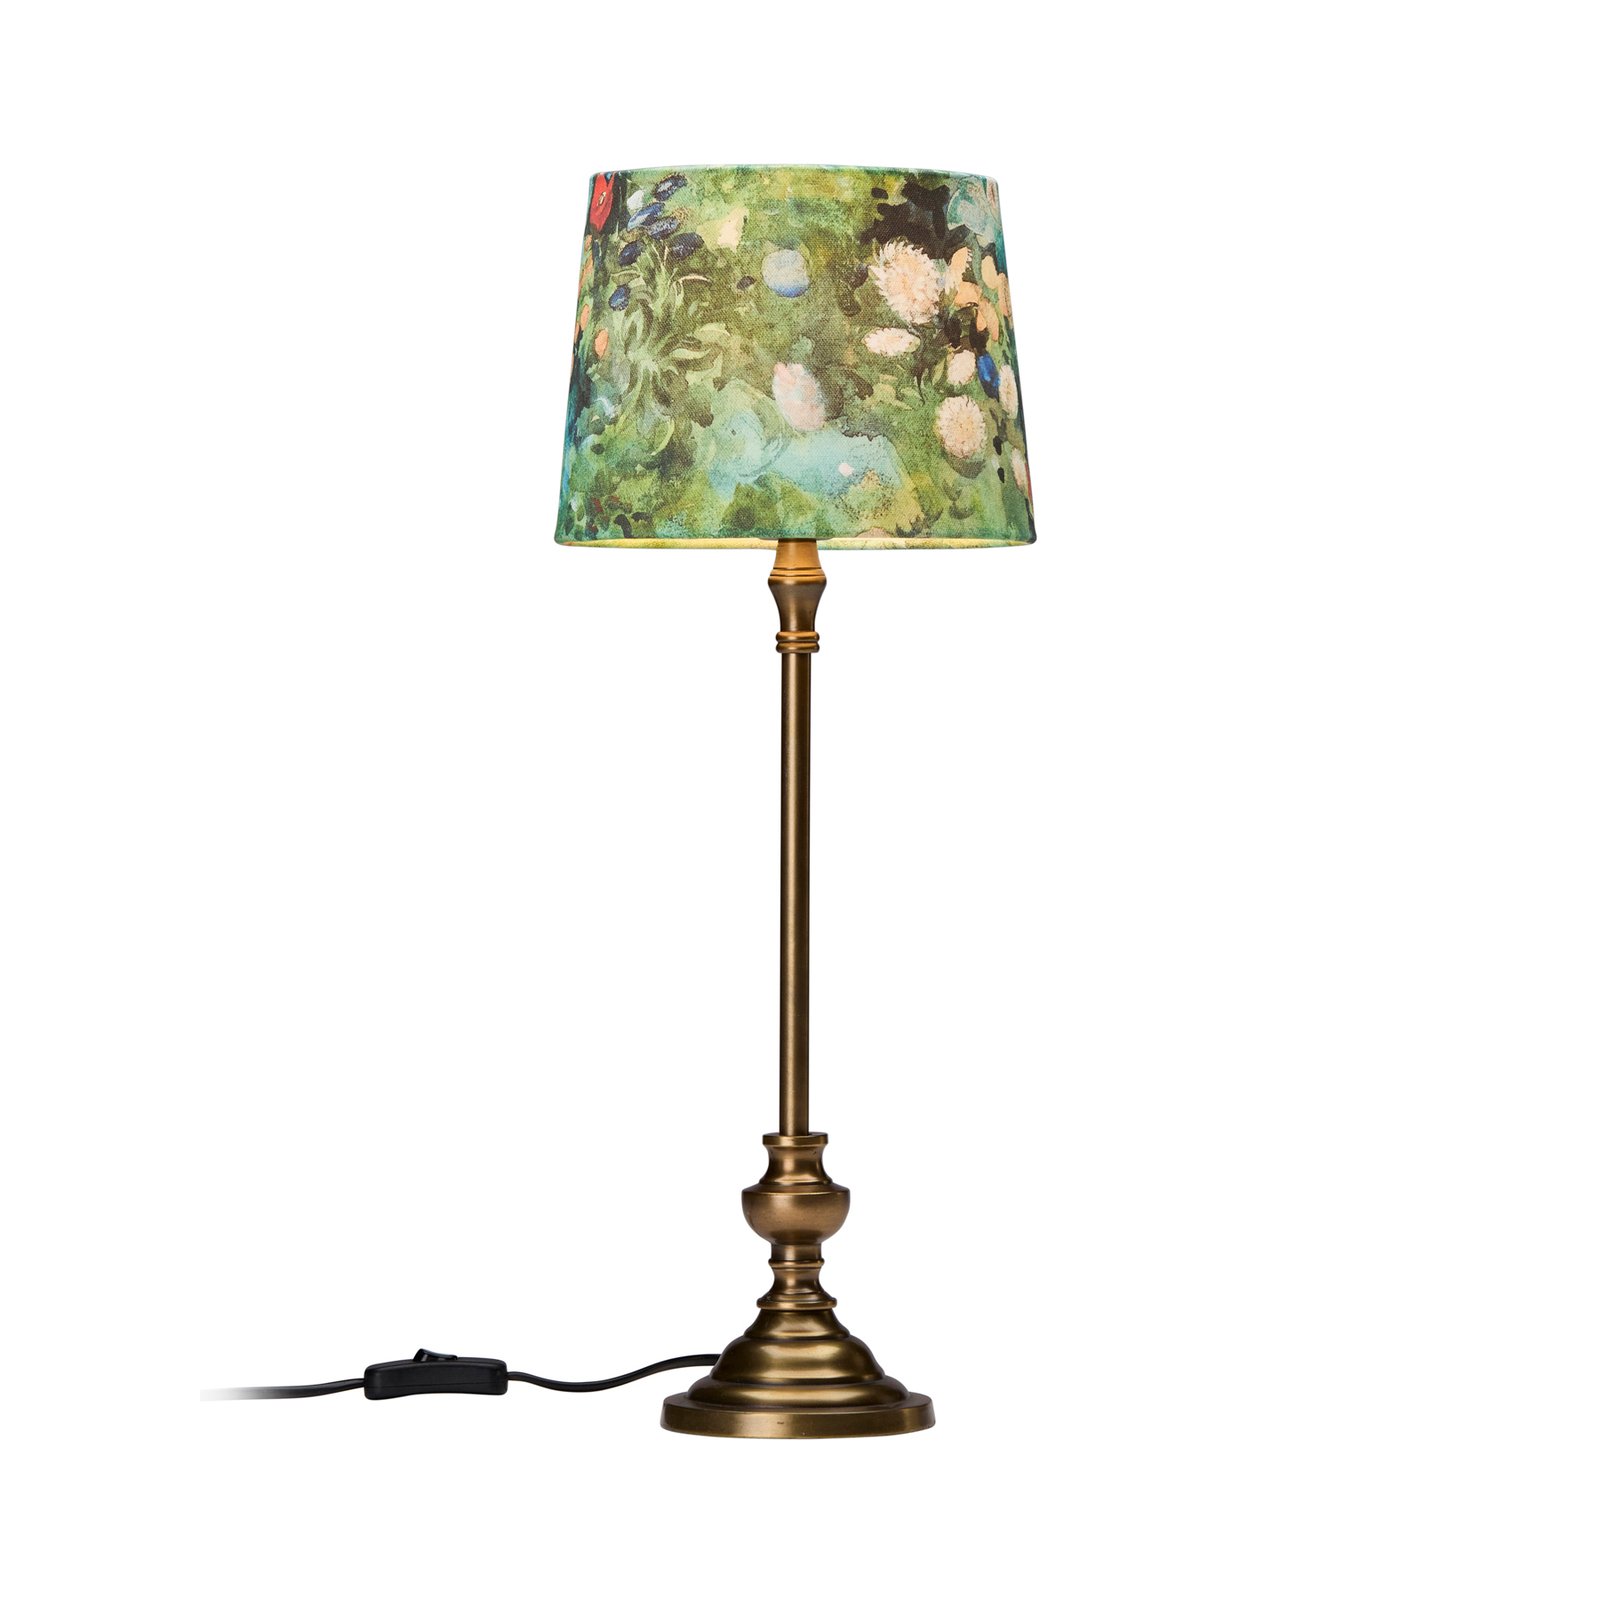 PR Home Andrea table lamp brass/patterned green